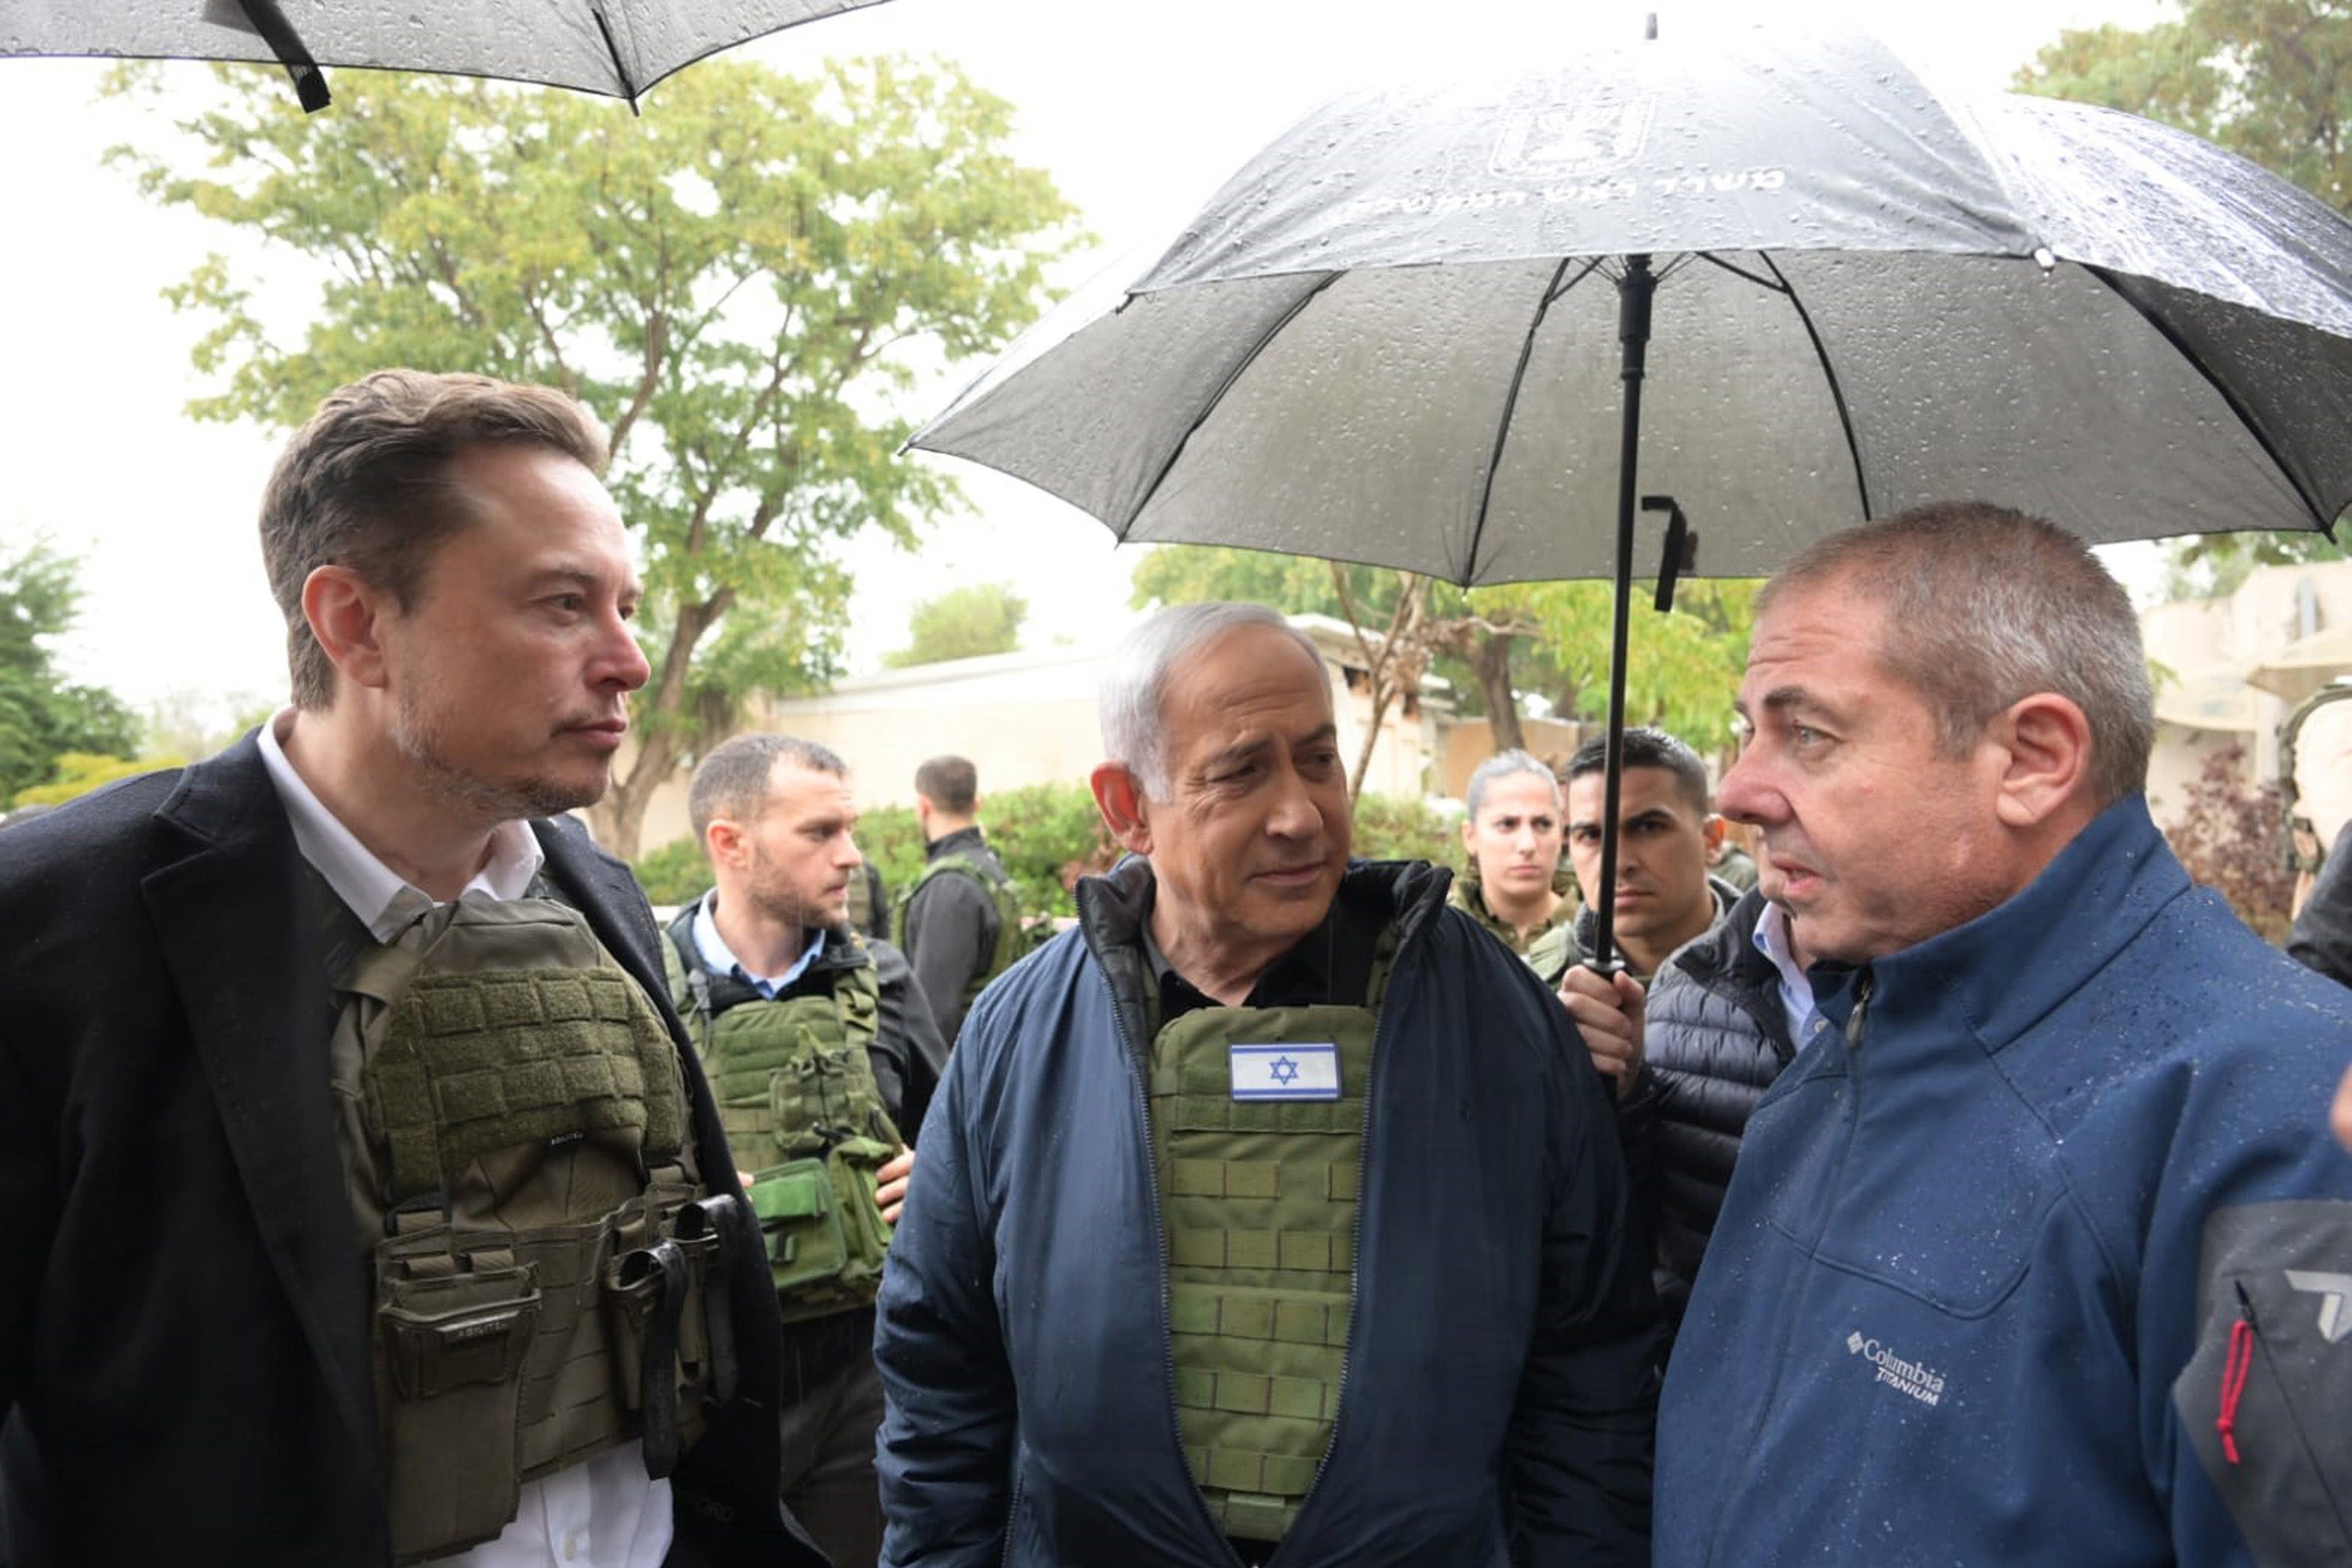 Earlier this week, Mr Musk visited Israel and toured a kibbutz attacked by Hamas